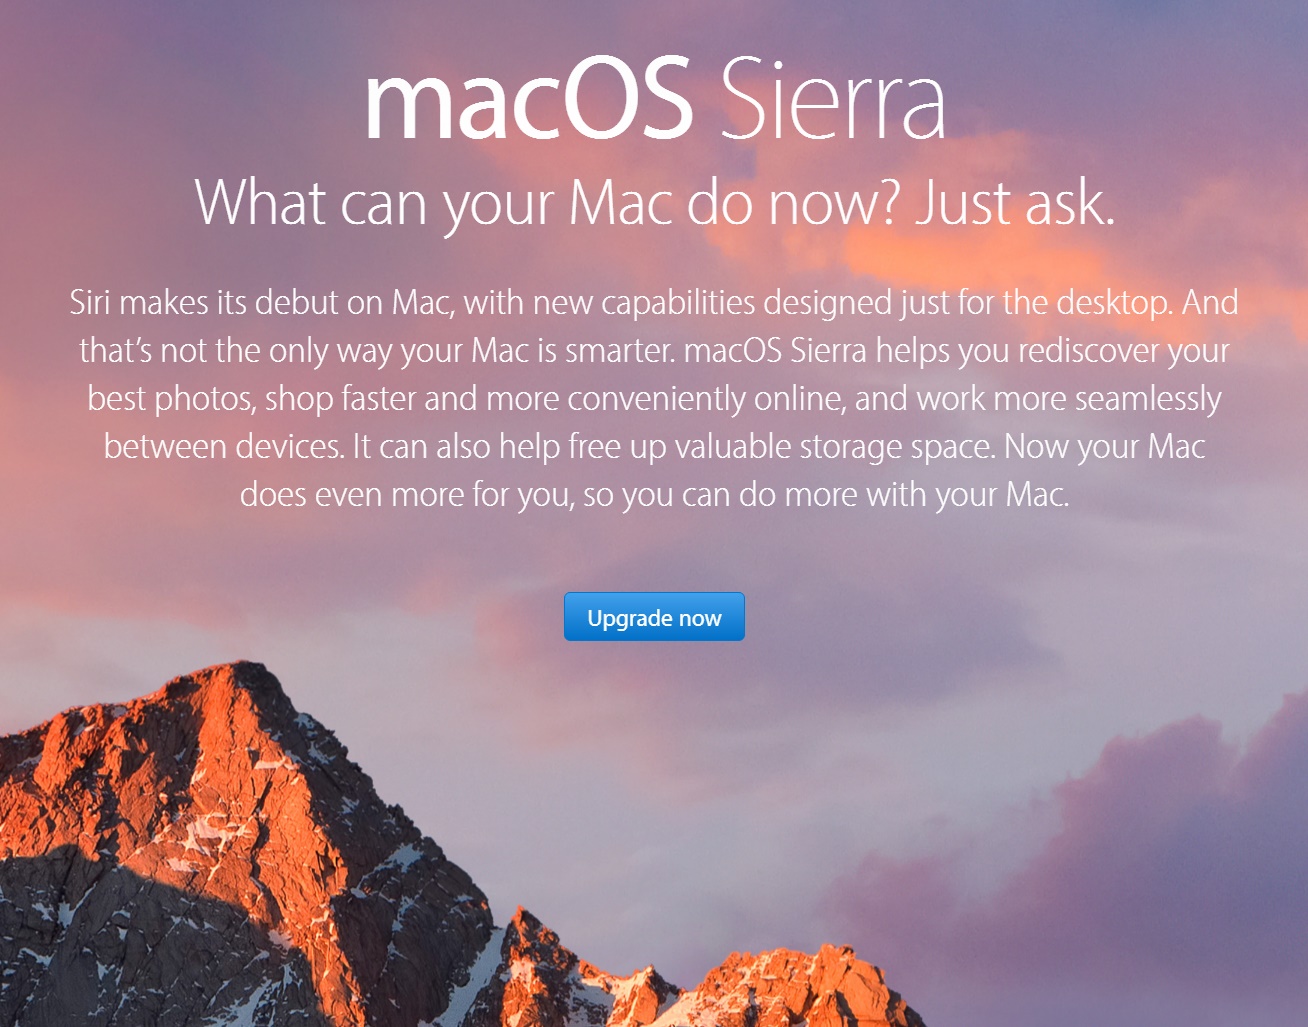 Apple macOS Sierra is available to owners of Apple iMac Retina